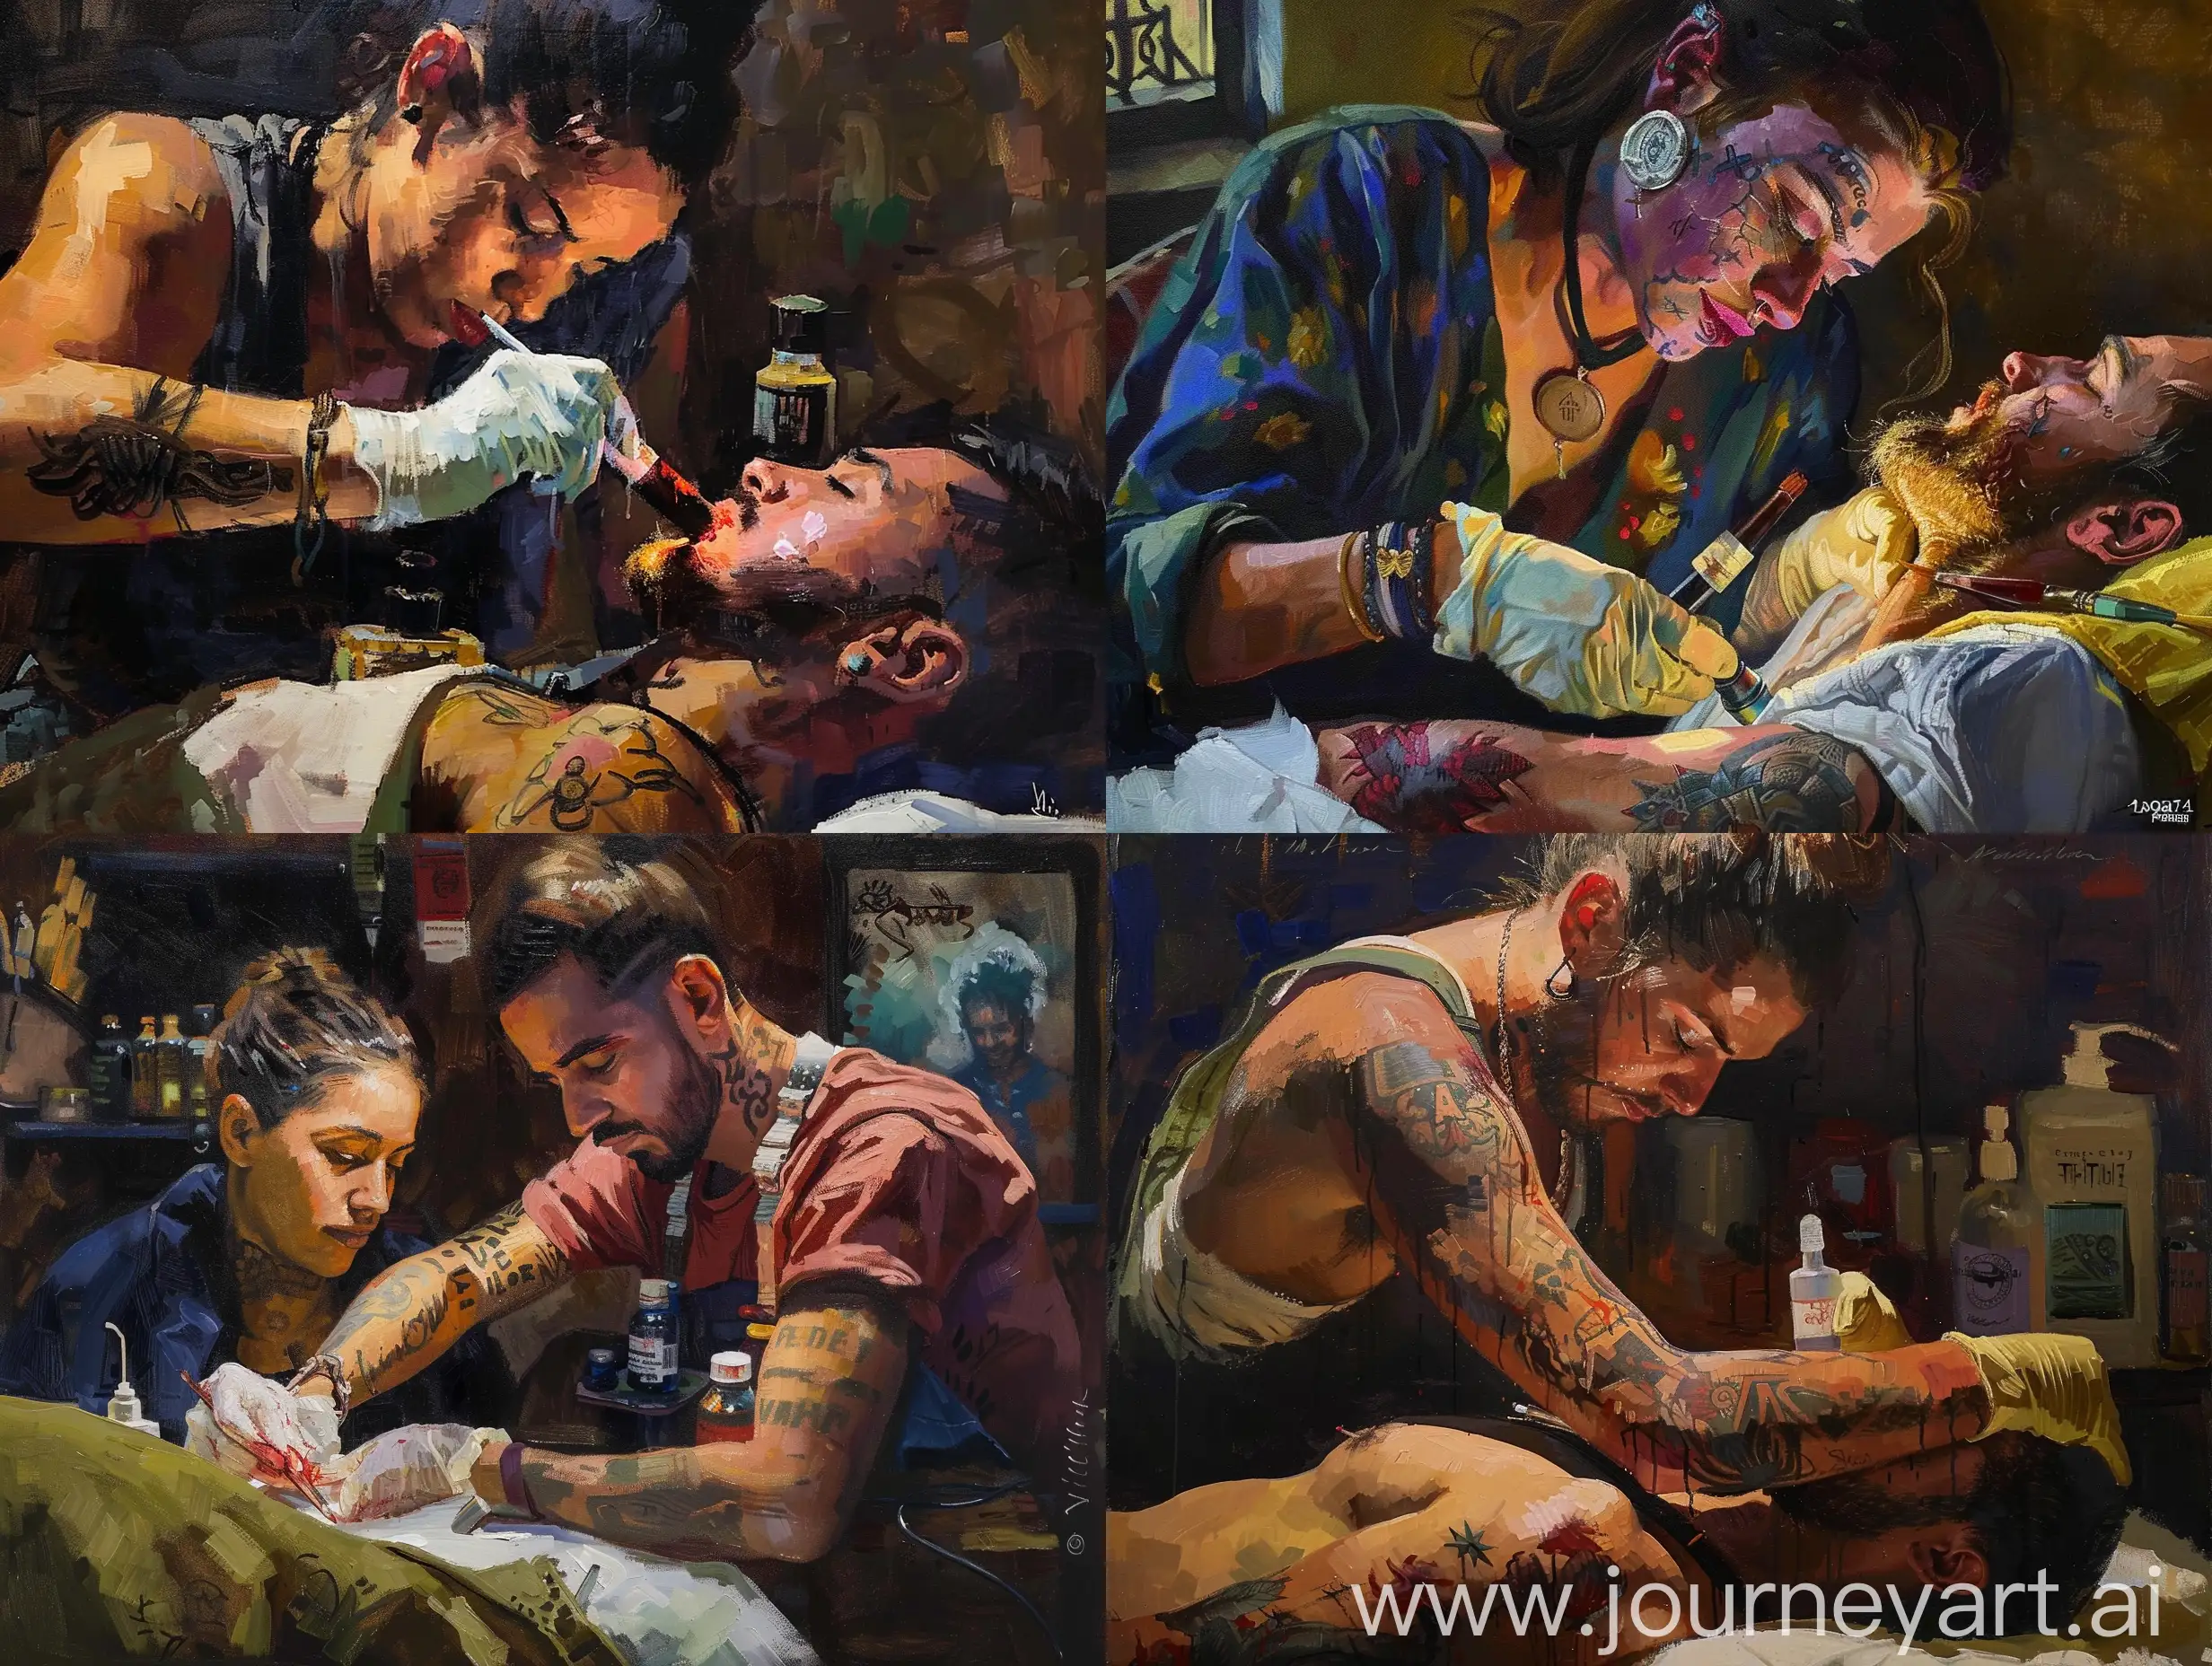 Professional-Female-Tattoo-Artist-Creating-Artwork-on-Client-Genre-Oil-Painting